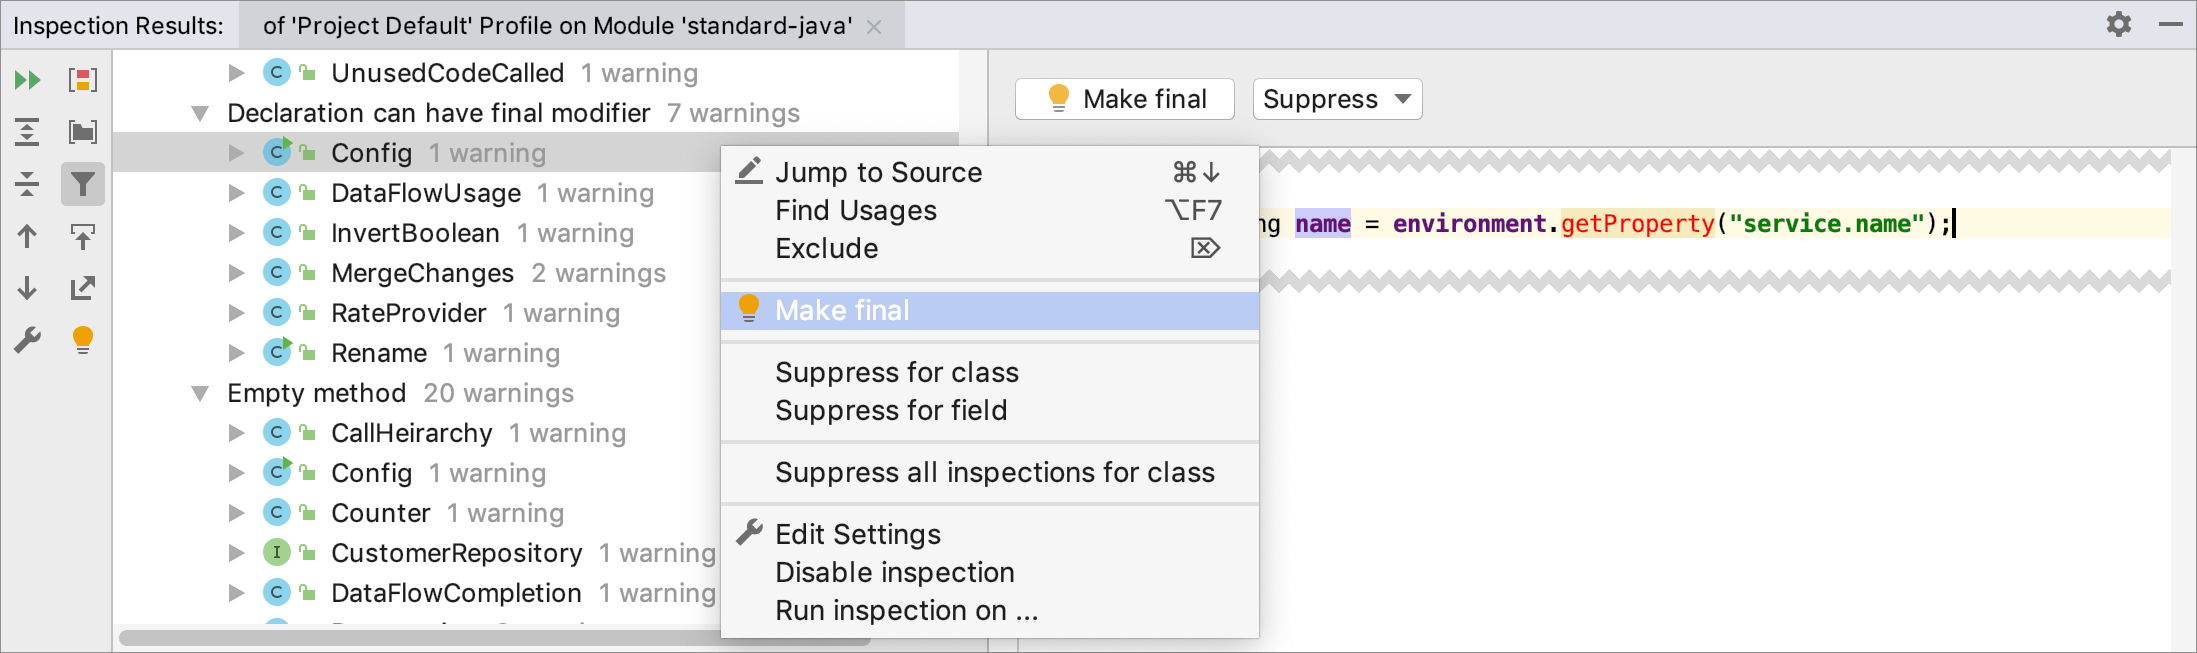 Inspection results tool window